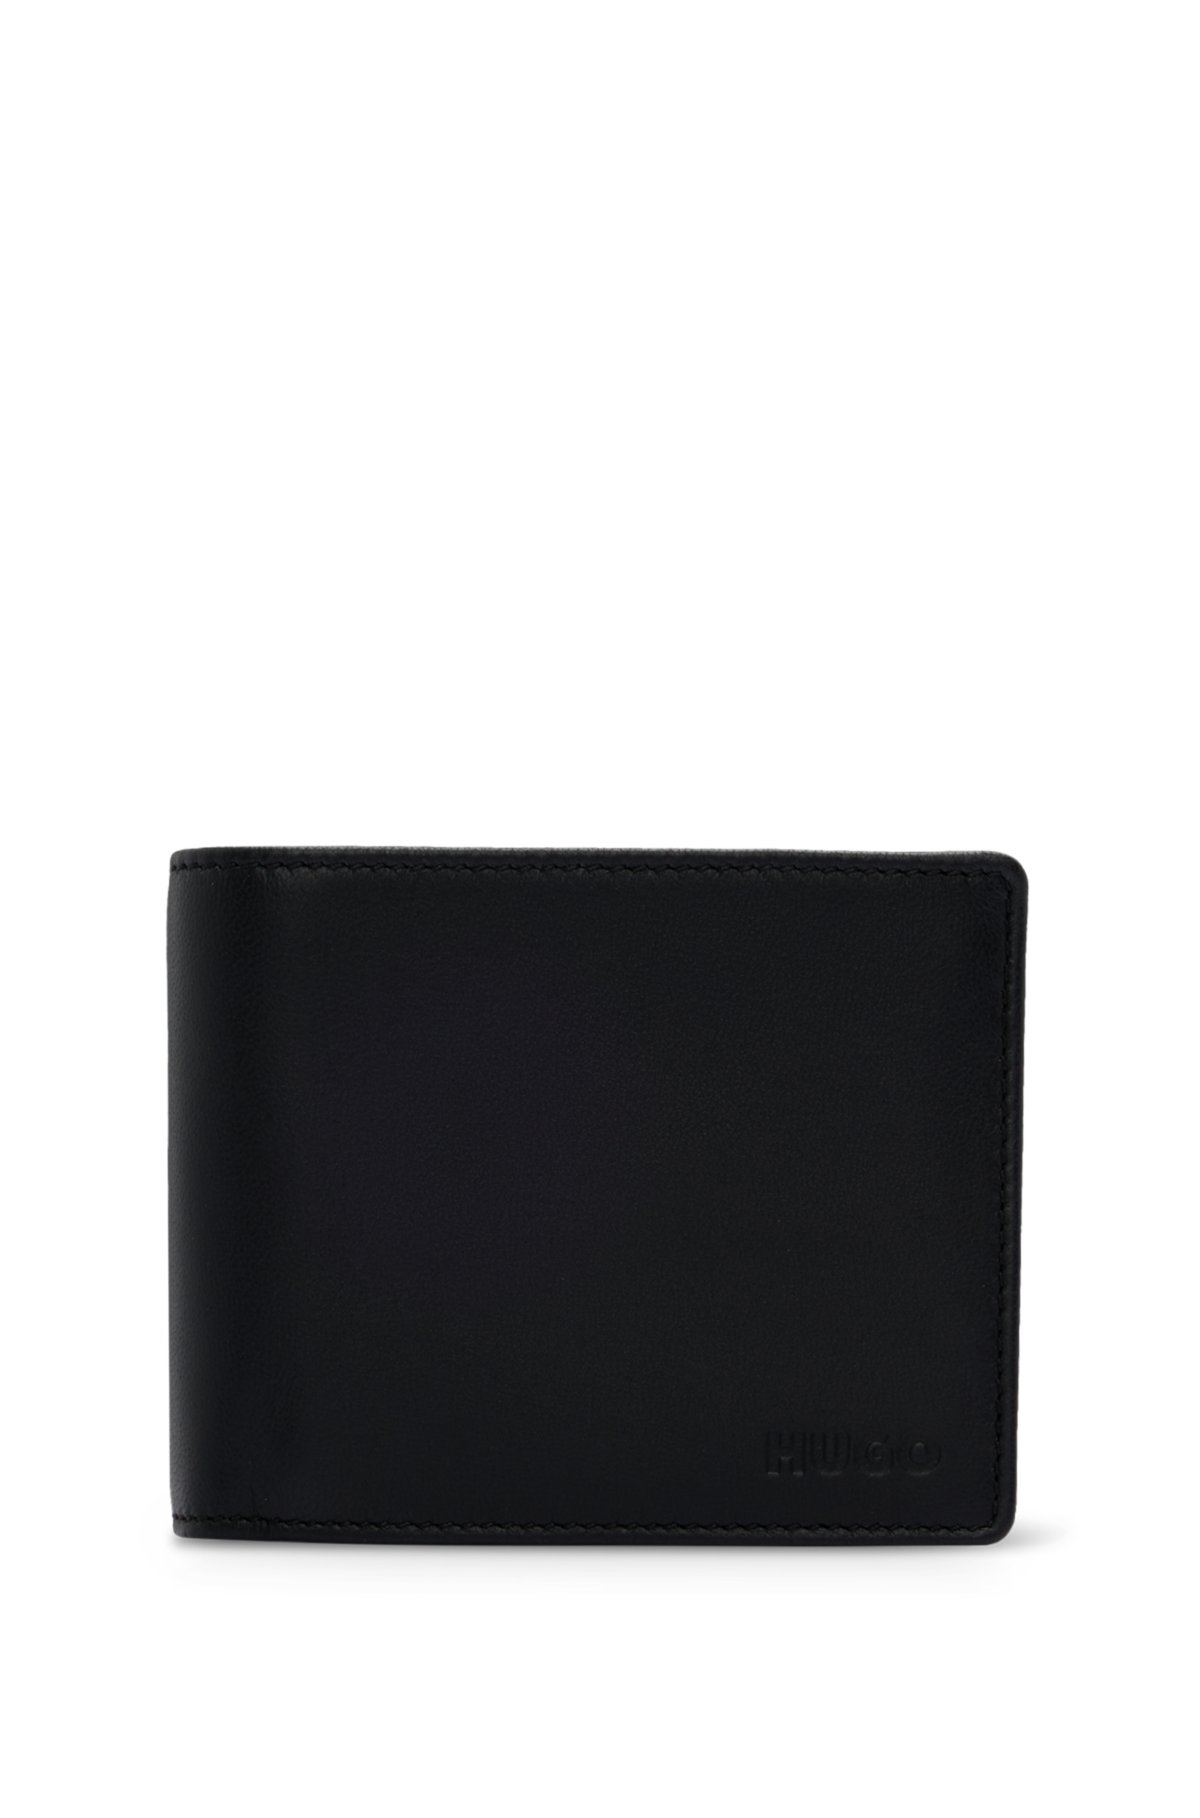 HUGO - Leather wallet with embossed logo